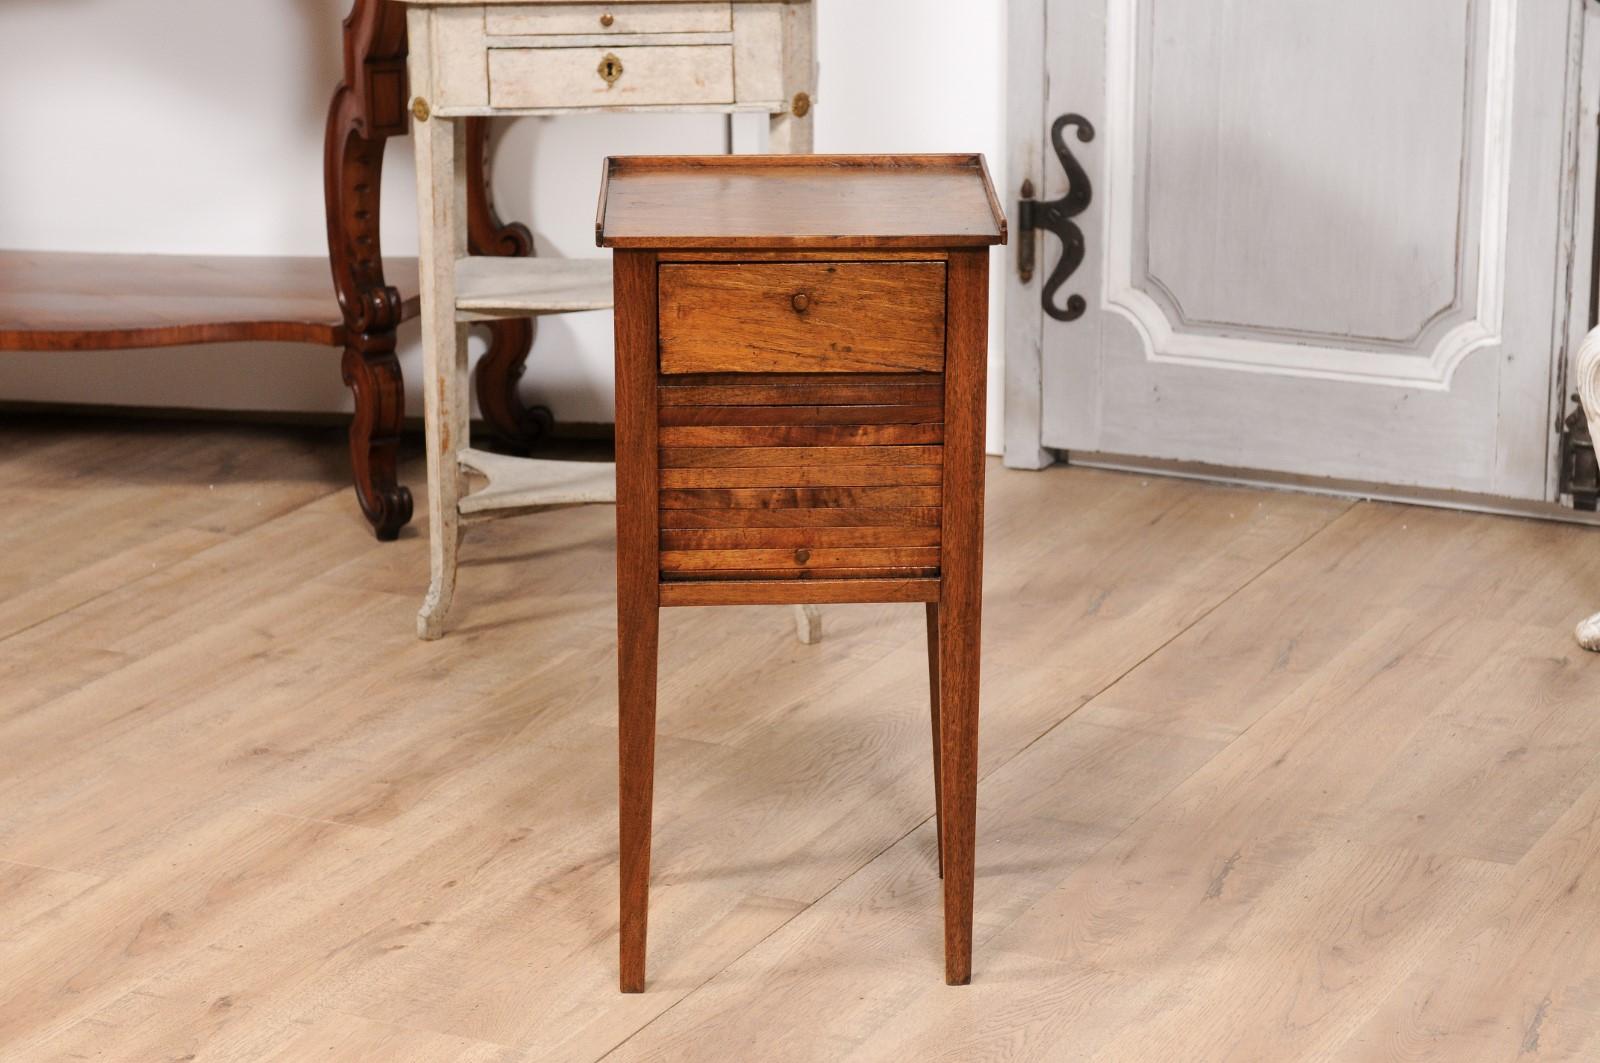 18th Century Italian Walnut Bedside Table with Single Drawer and Tambour Door In Good Condition For Sale In Atlanta, GA